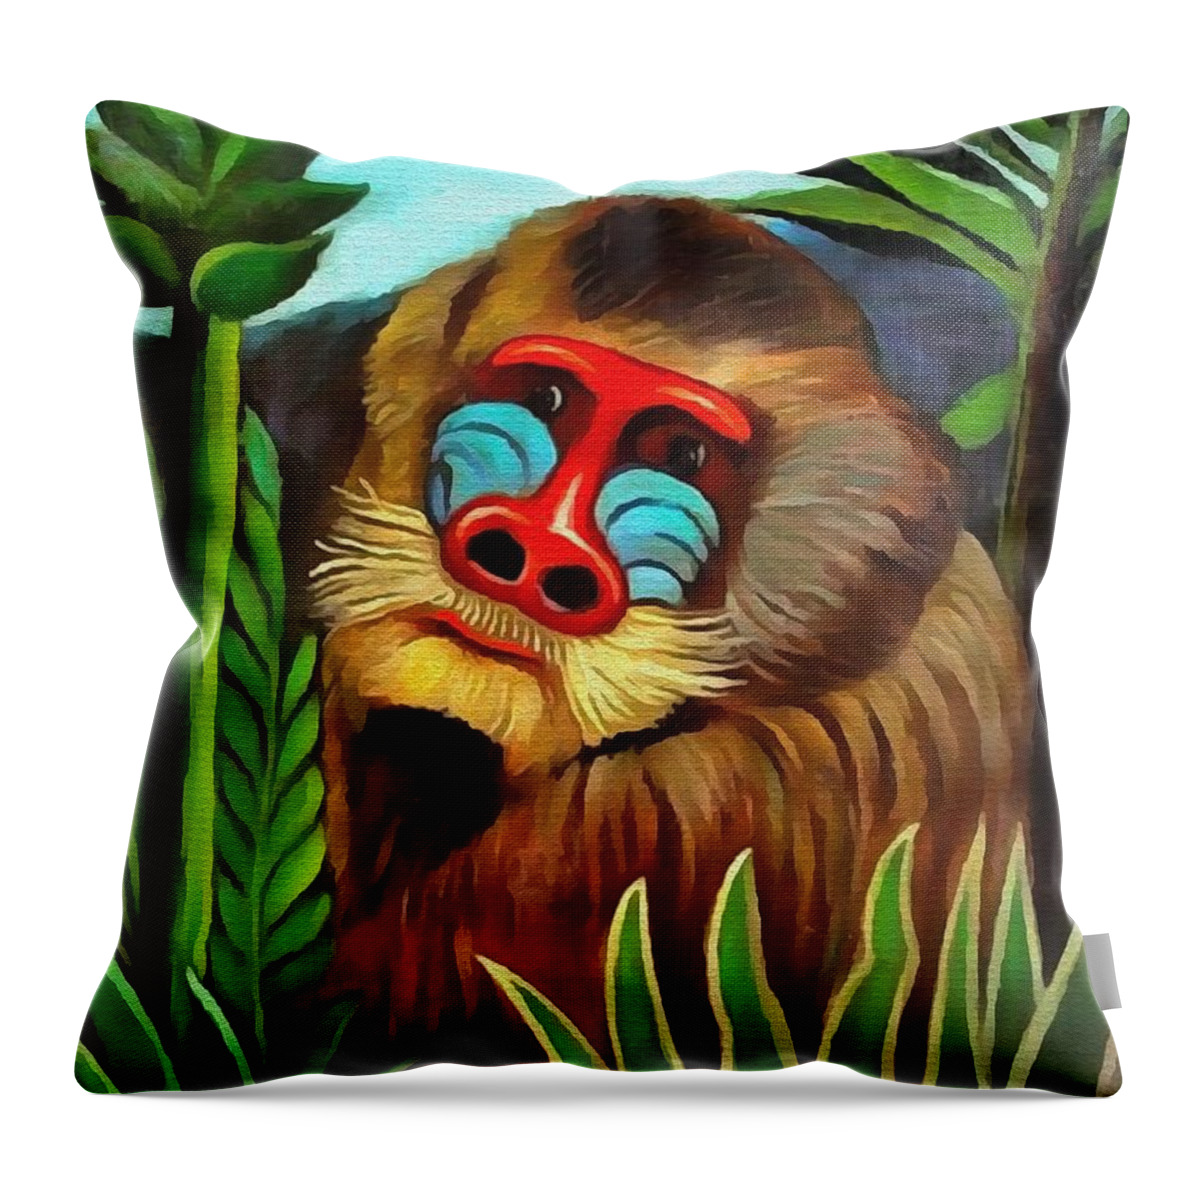 Henri Rousseau Throw Pillow featuring the painting Mandrill In The Jungle by Henri Rousseau